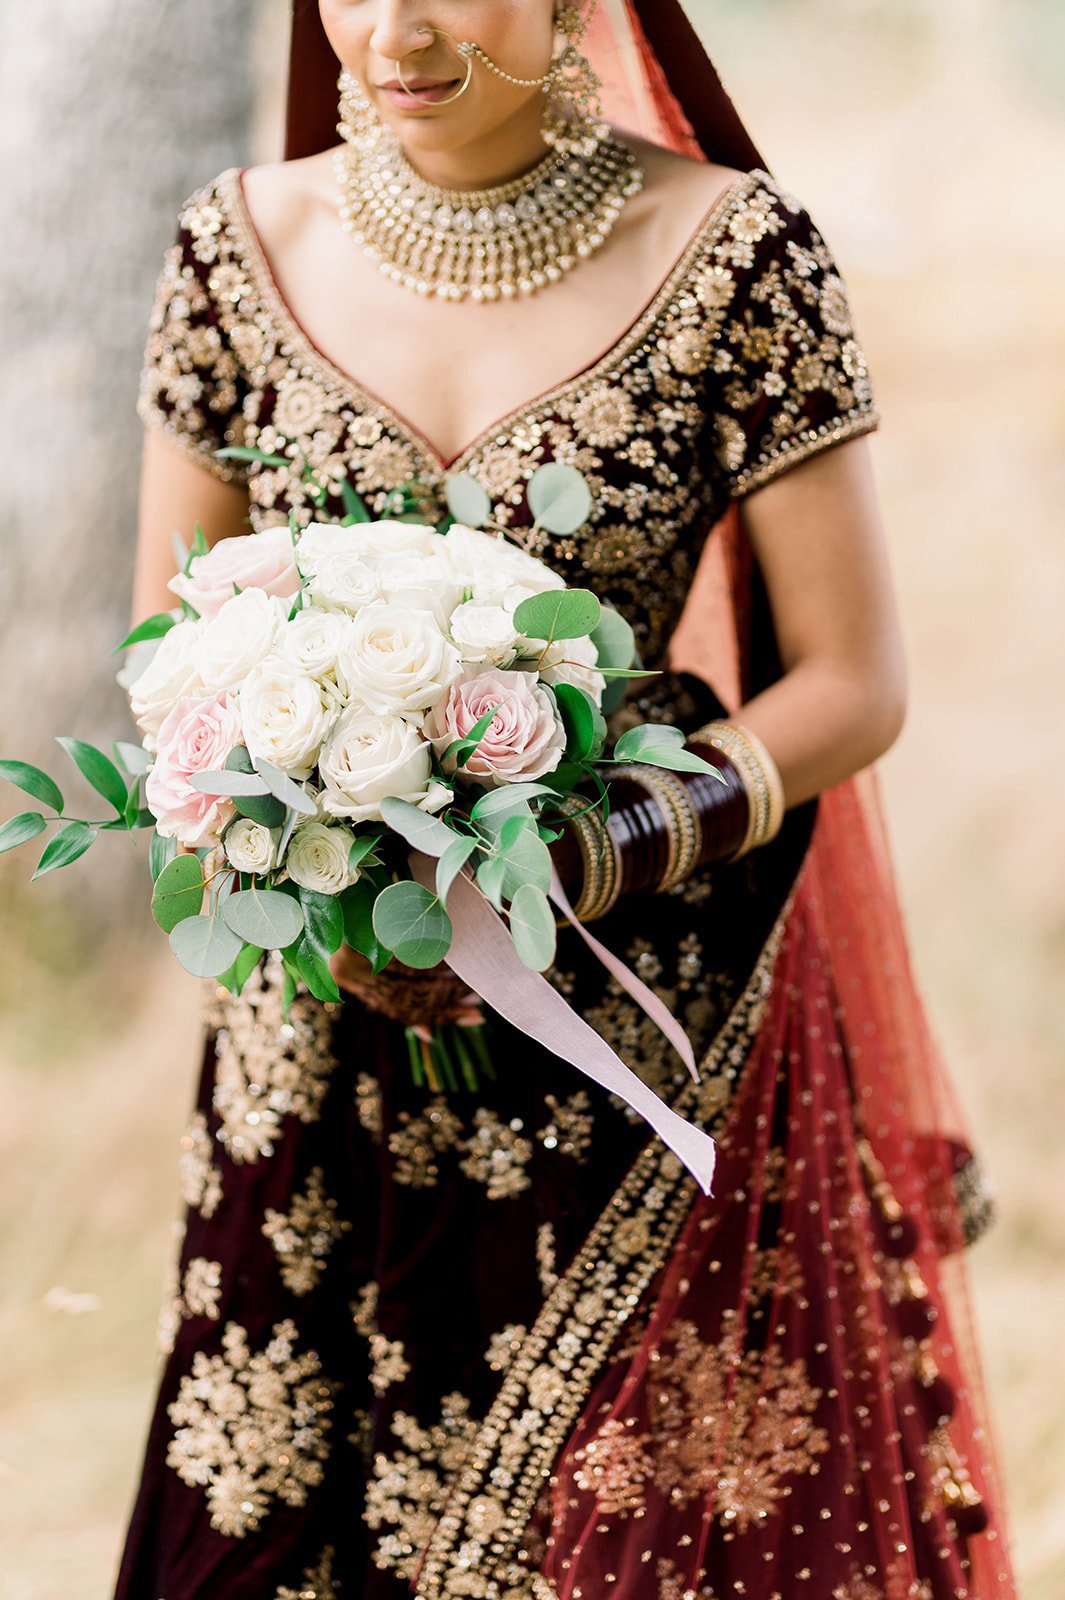 An indian bride holds a beautiful white and pink bouquet